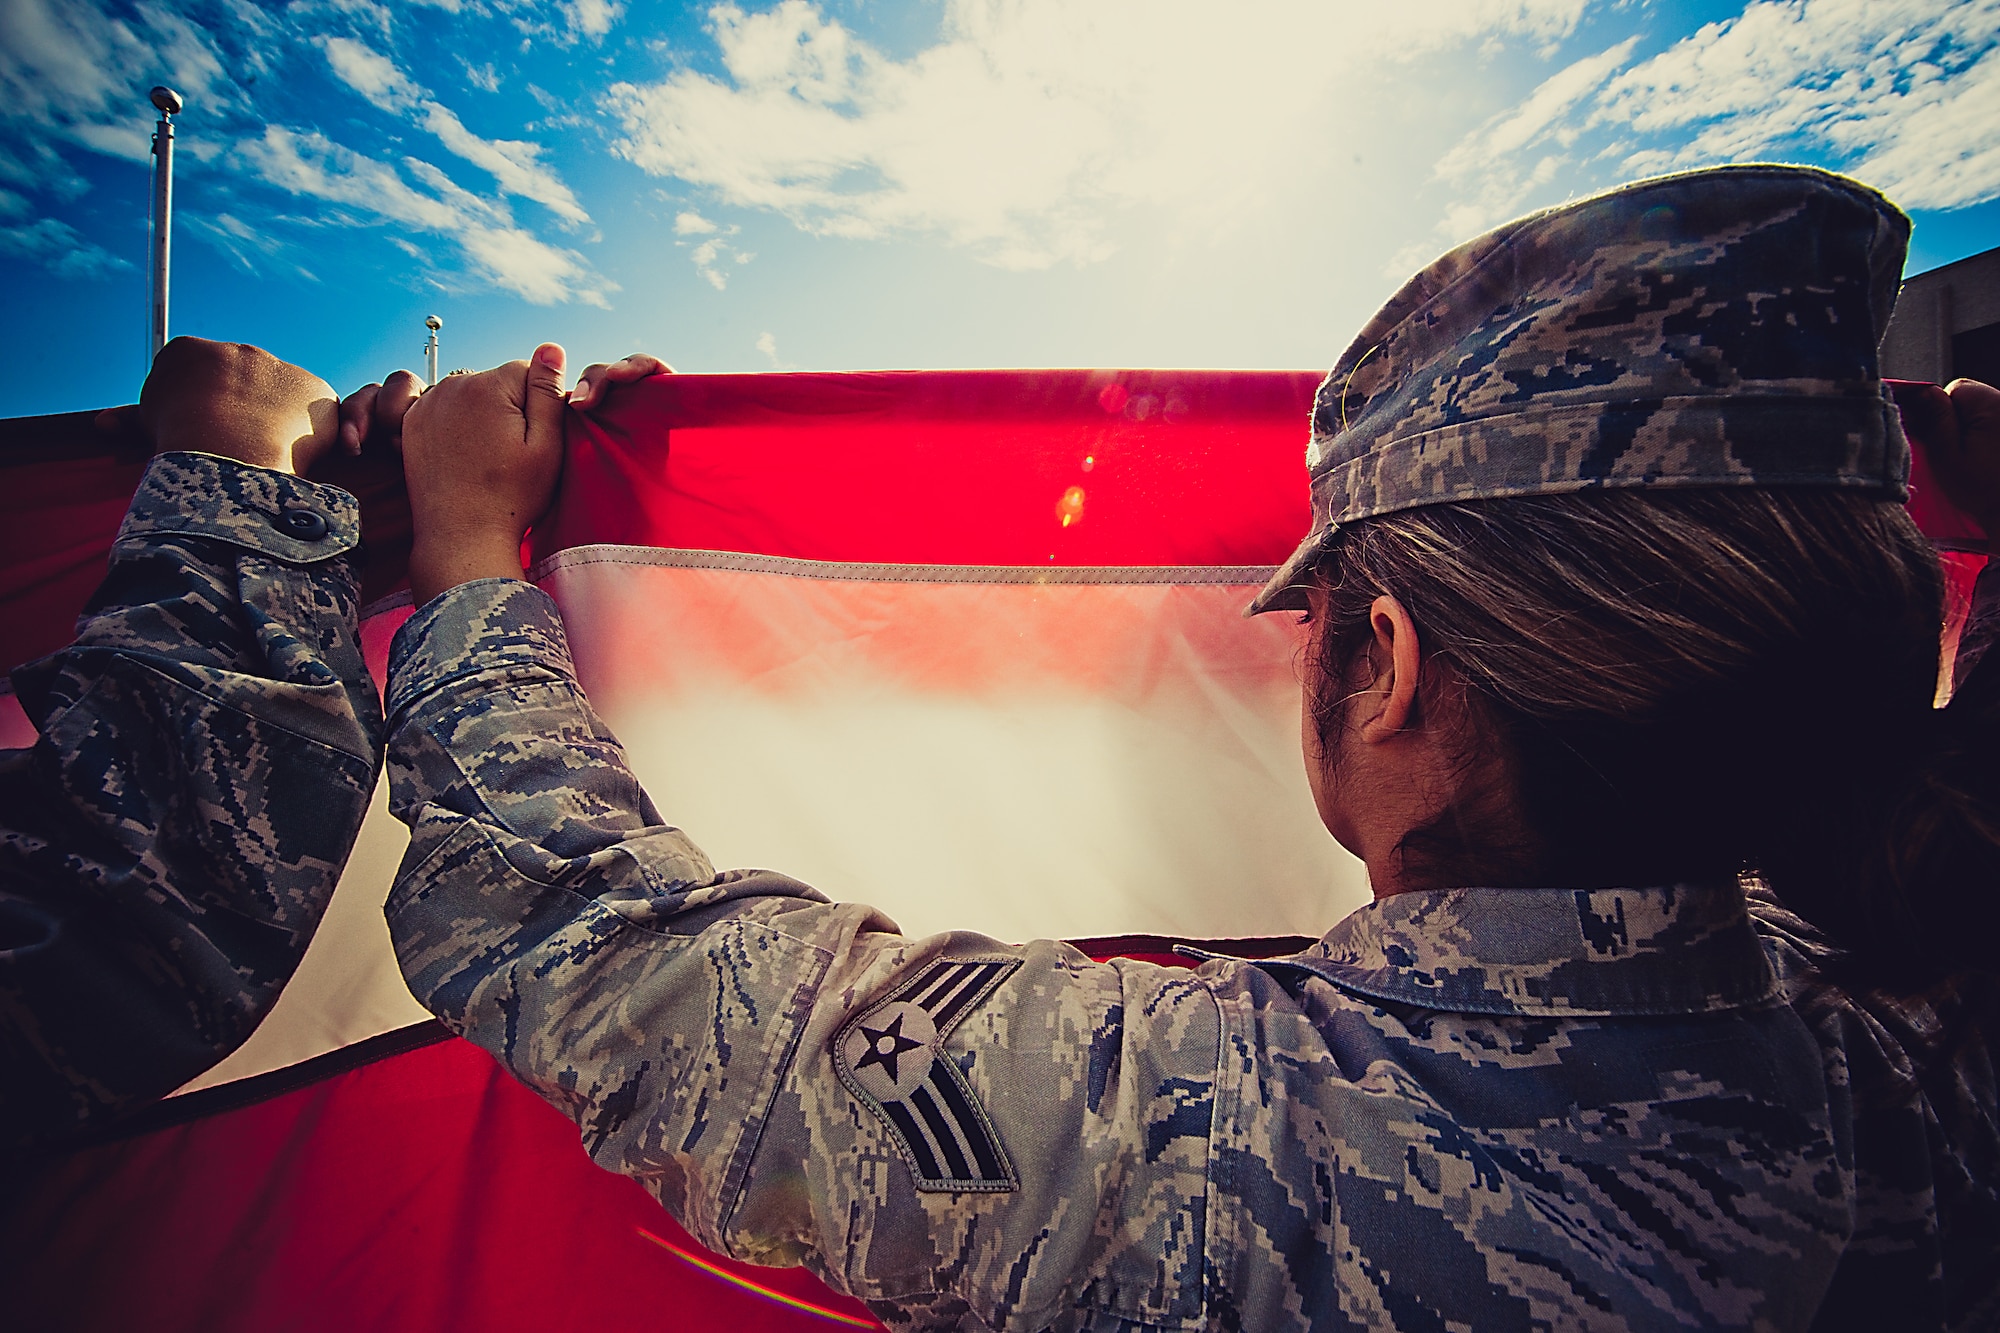 A member of the flag detail holds the flag tightly at the practice prior to the retreat ceremony March 29.  The flag detail and flight positions were filled by women in honor of Women’s History Month.  More than 30 women participated in the ceremony.  To see more photos of the all-women flag detail go to facebook.com/teameglin.  (U.S. Air Force photo/Samuel King Jr.)